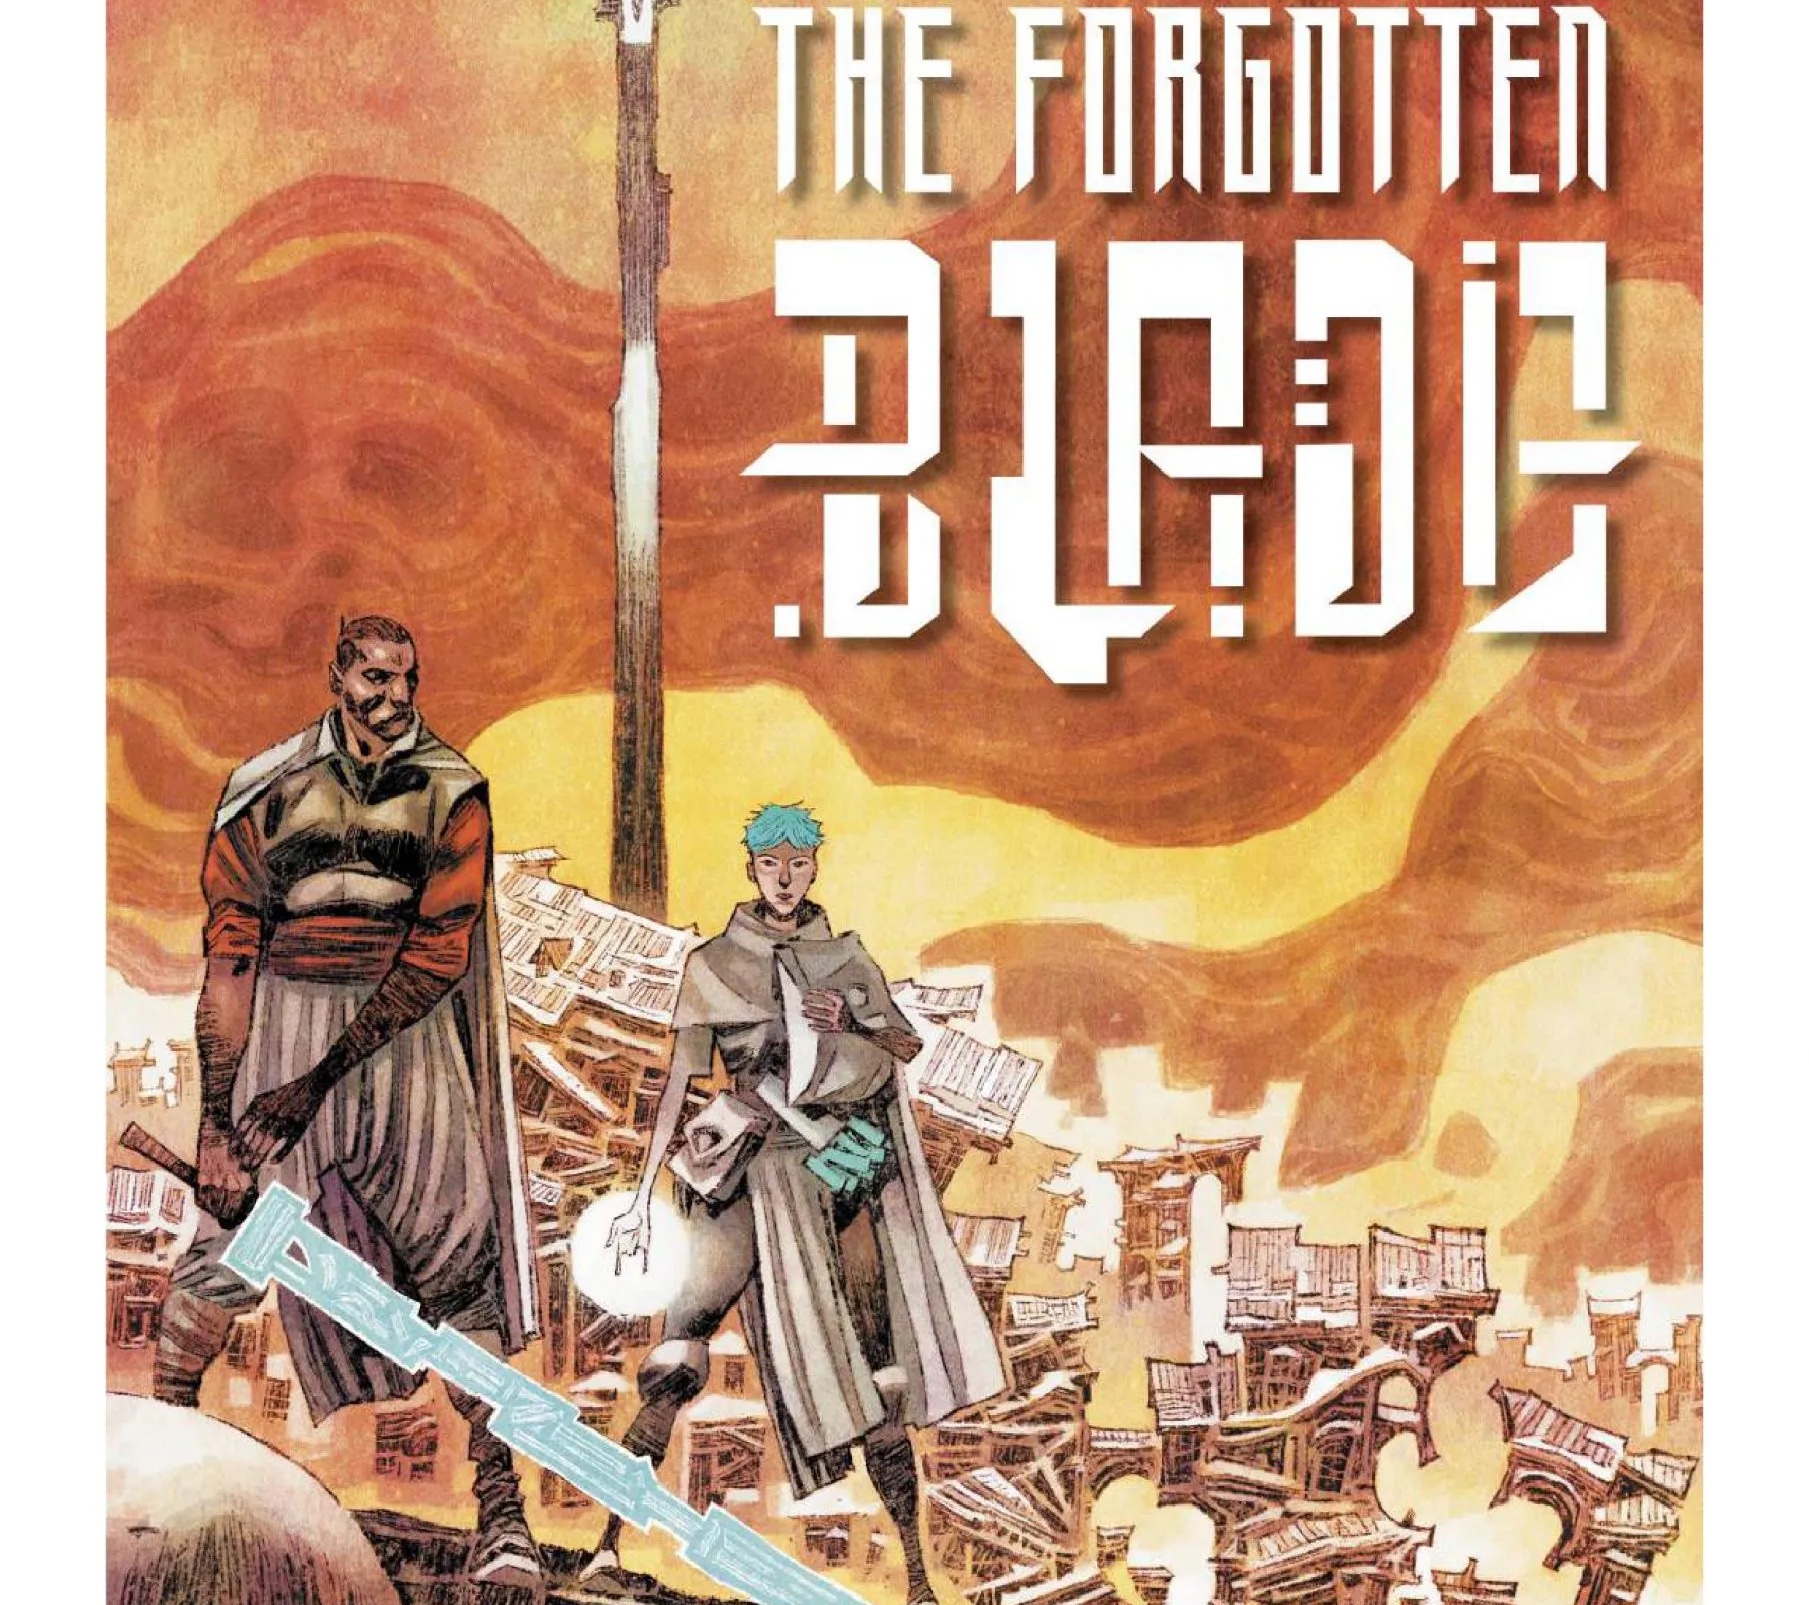 'The Forgotten Blade' draws you in with sci-fi, fantasy, and a lone warrior